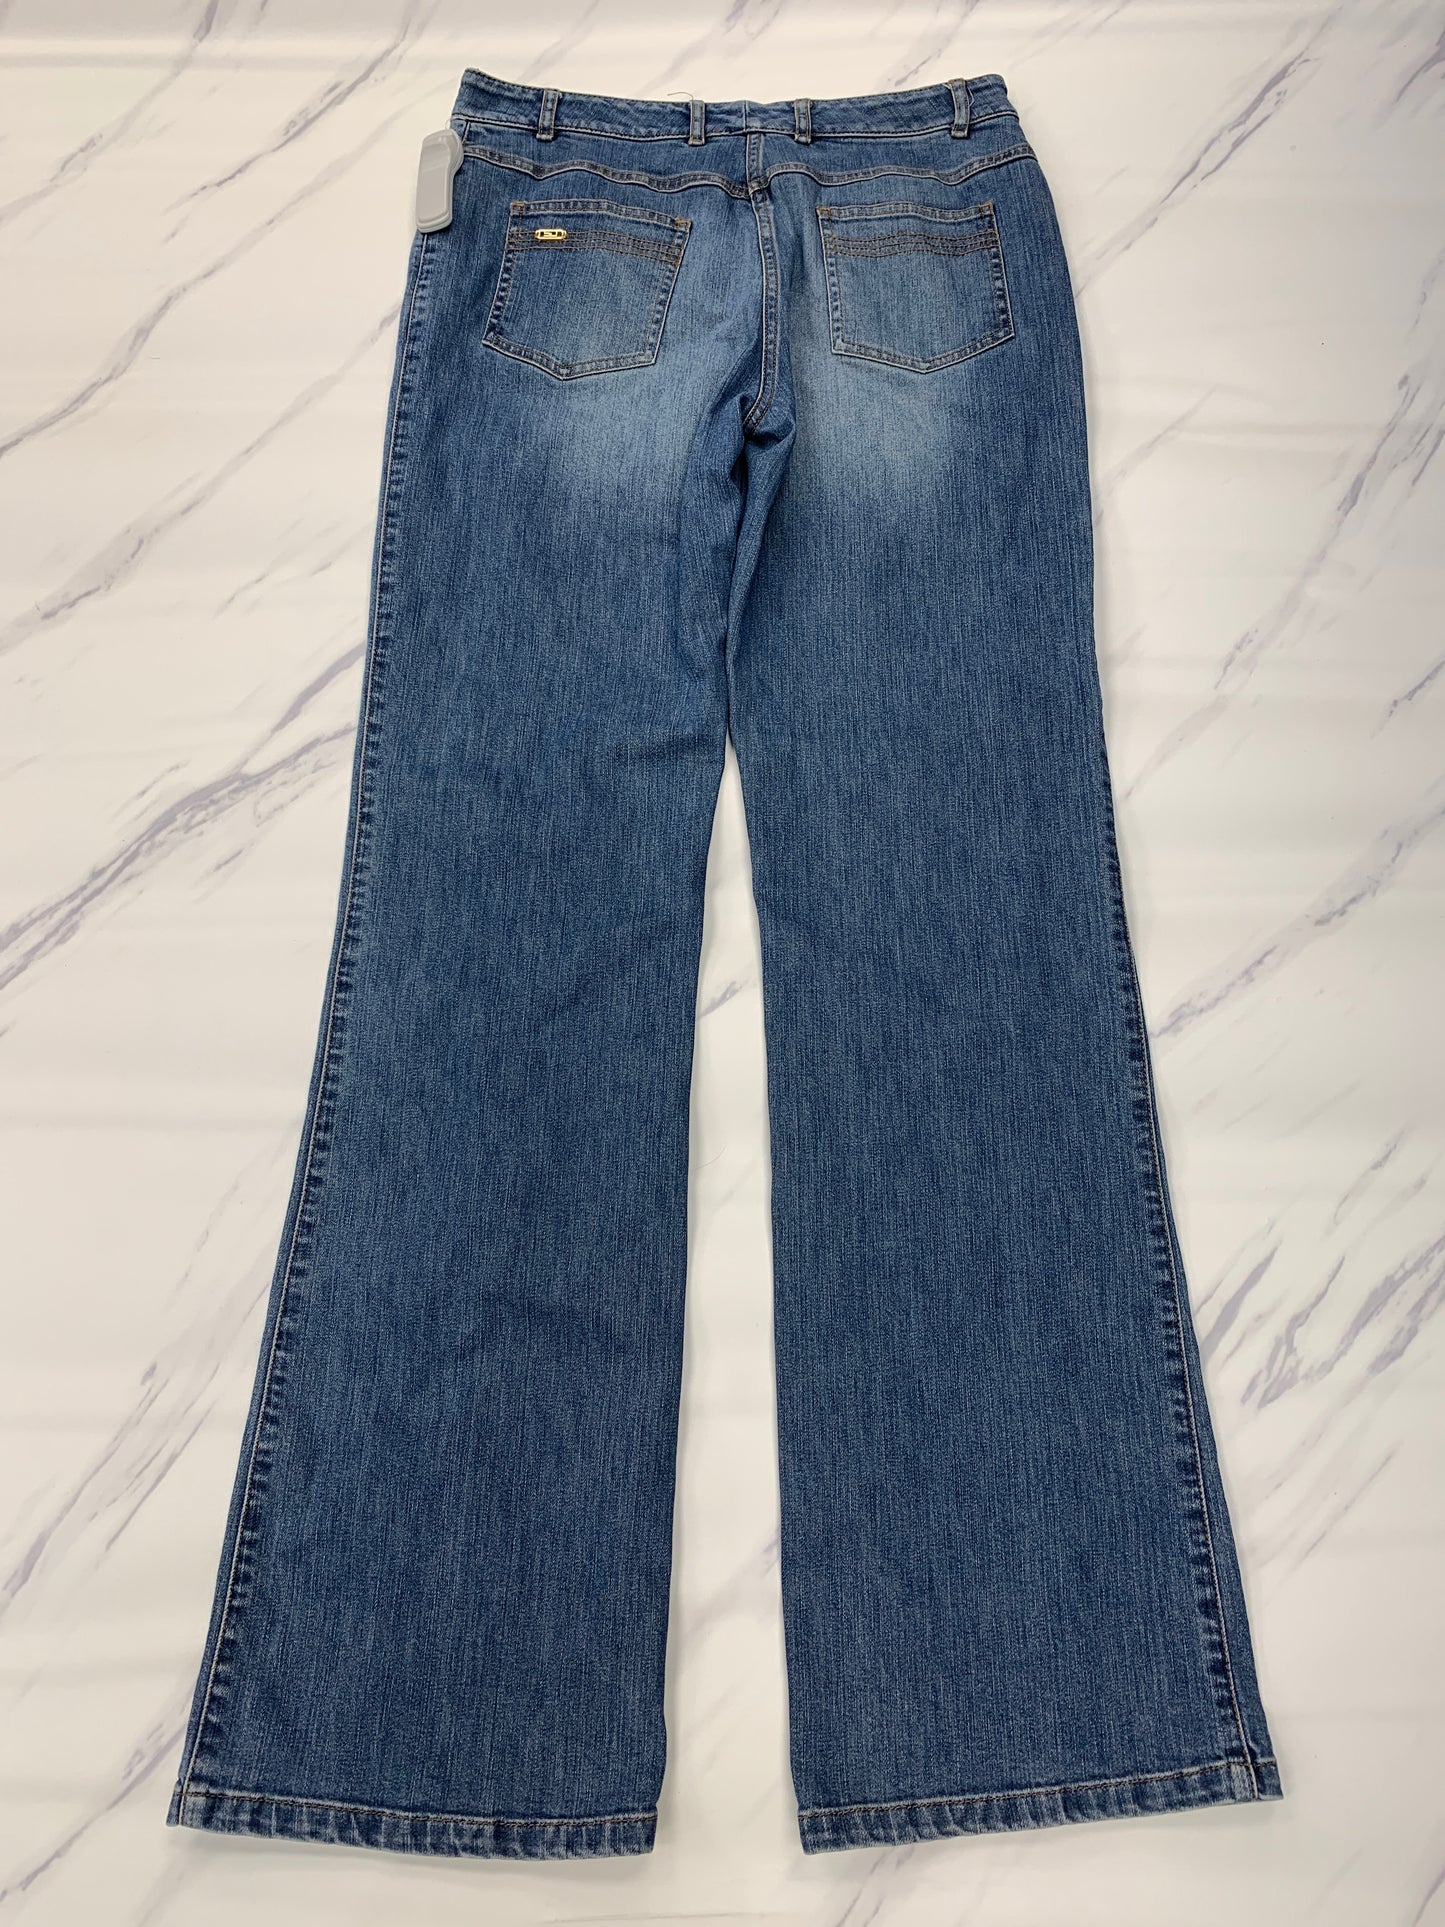 Jeans Designer By St John Collection  Size: 8